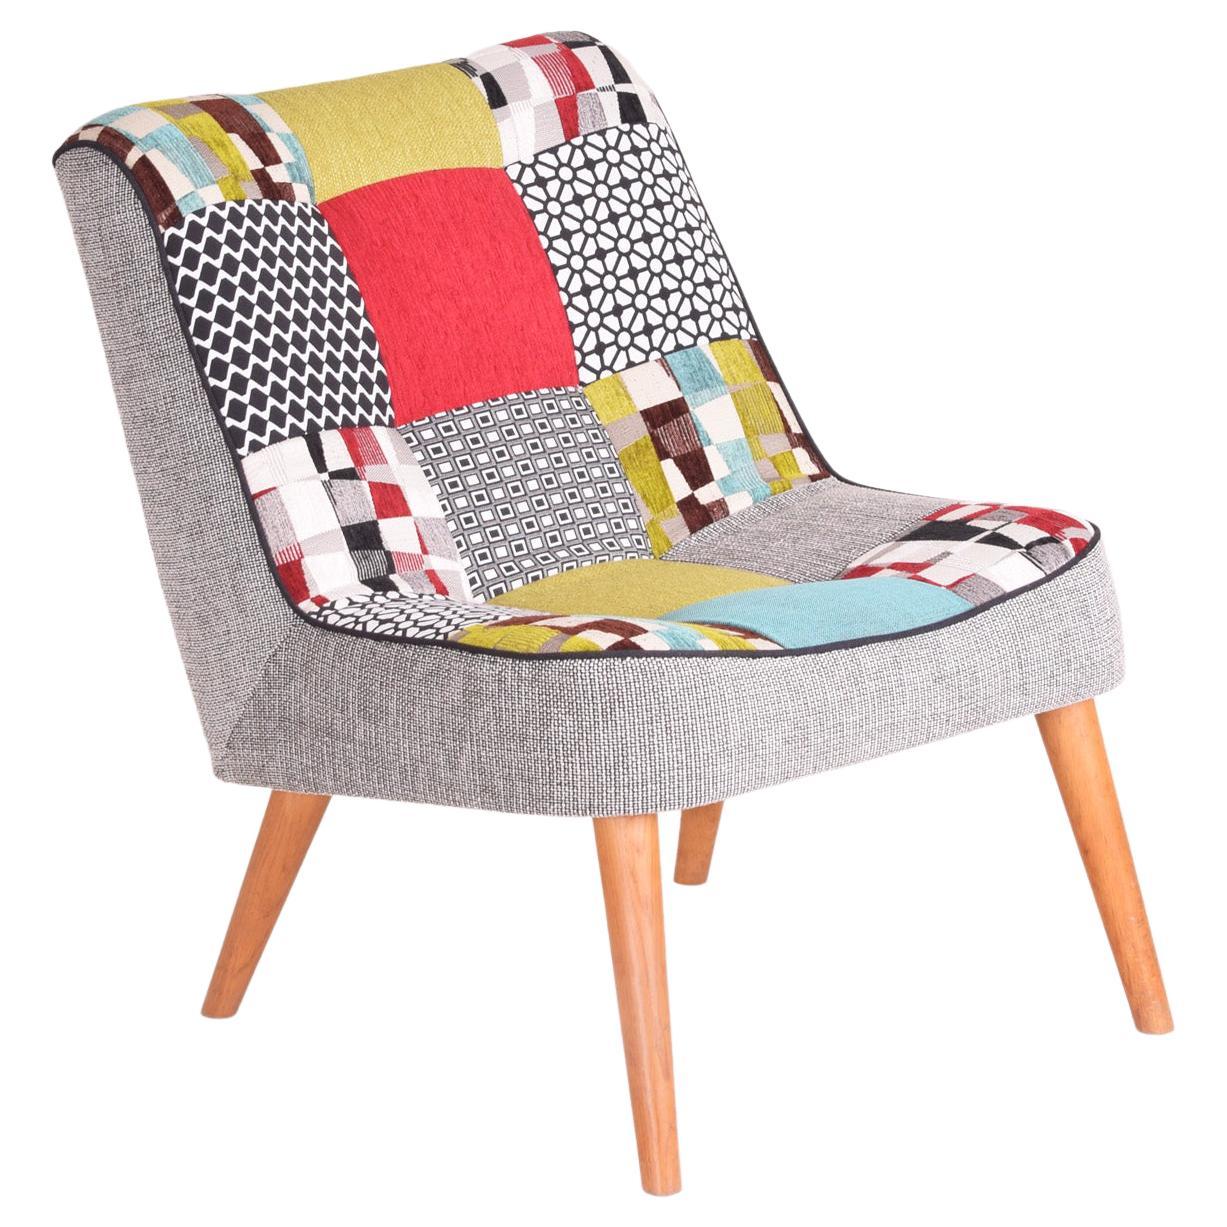 Completely Restored Czech Midcentury Colorful Armchair, Made in the 1950s For Sale